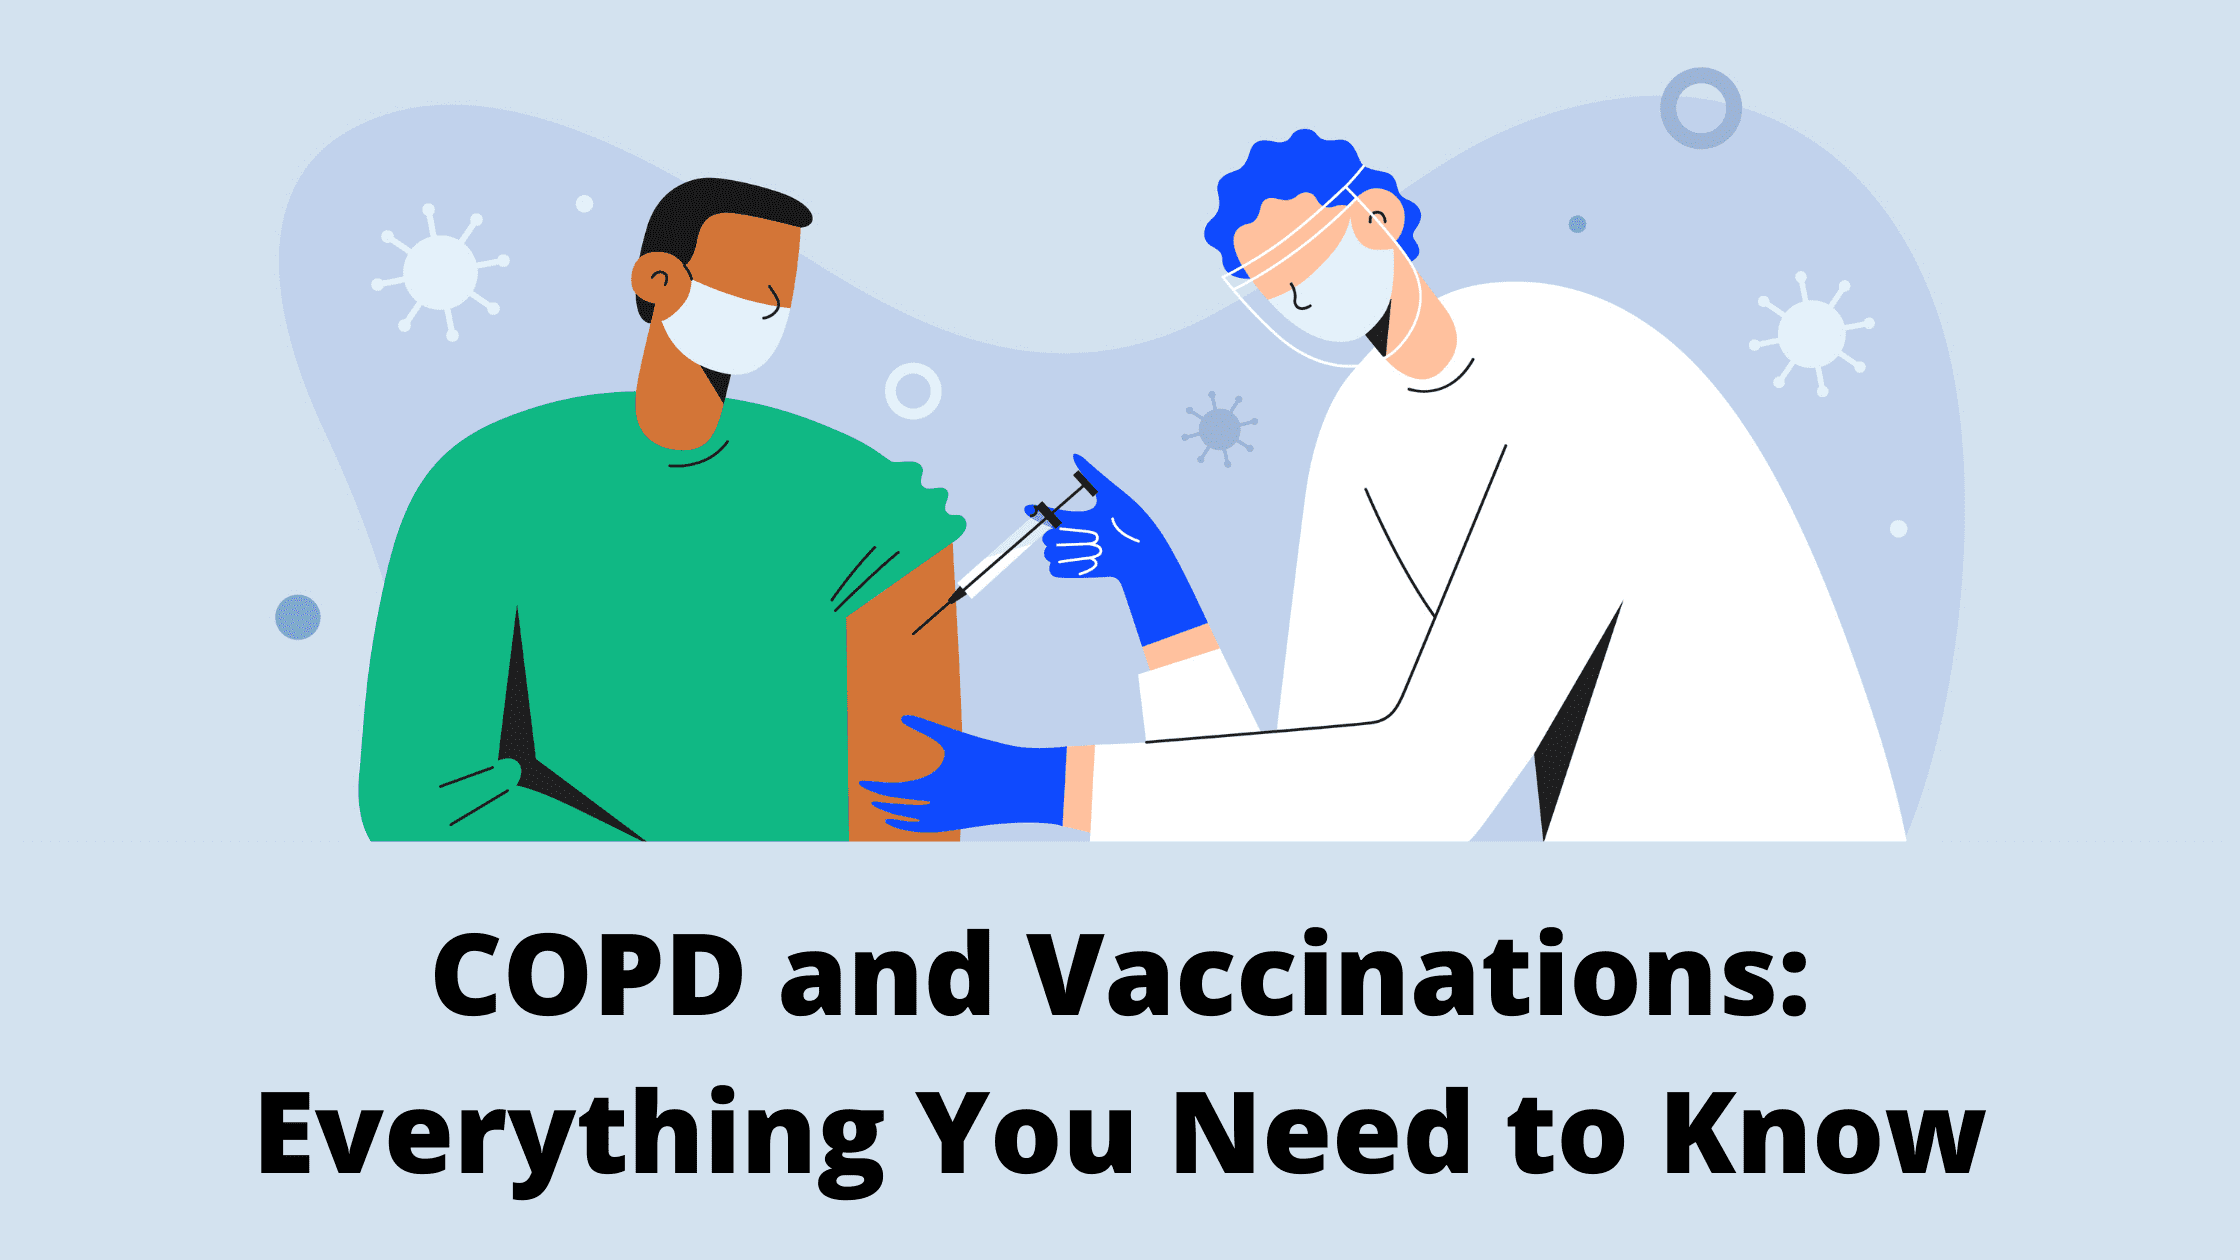 COPD and Vaccinations: Everything You Need to Know